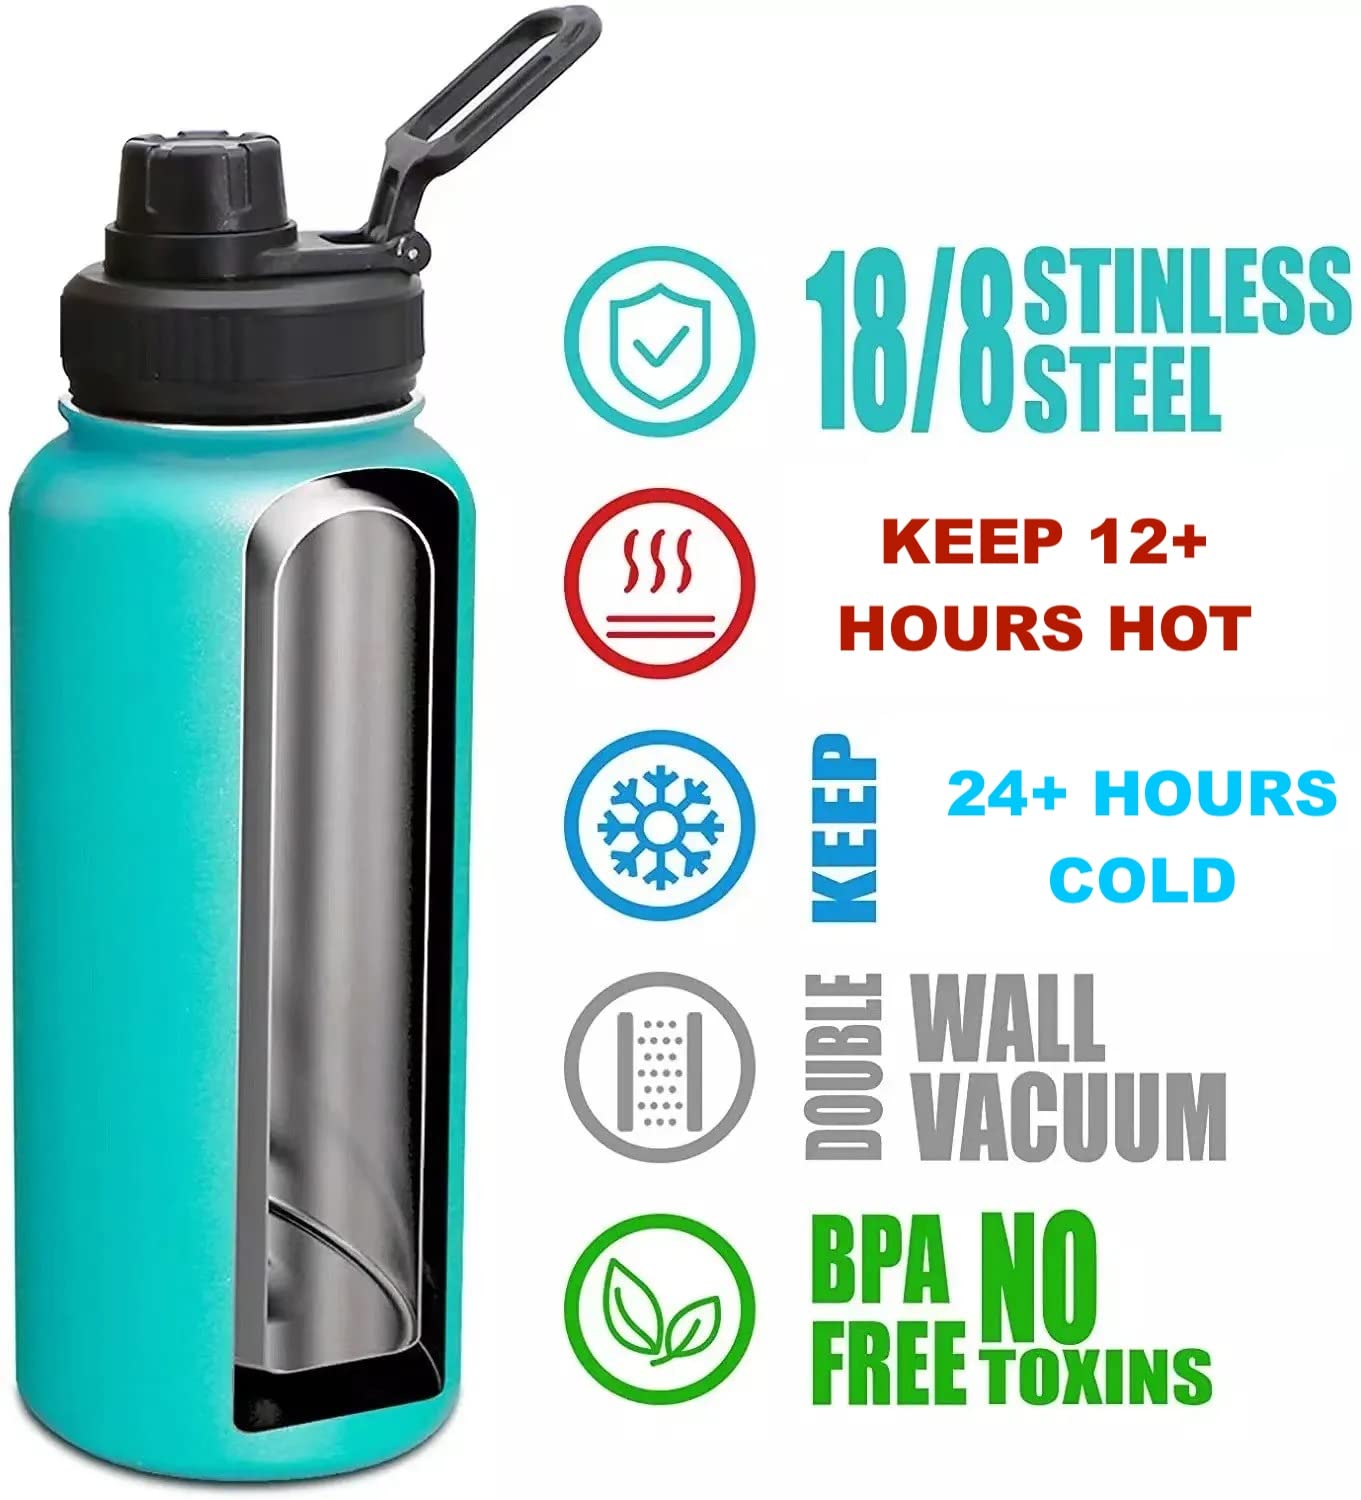 WAASS Sports Water Bottle - 32 Oz,Leak Proof, Vacuum Insulated Stainless Steel, Double Walled Hot & Cold Drink